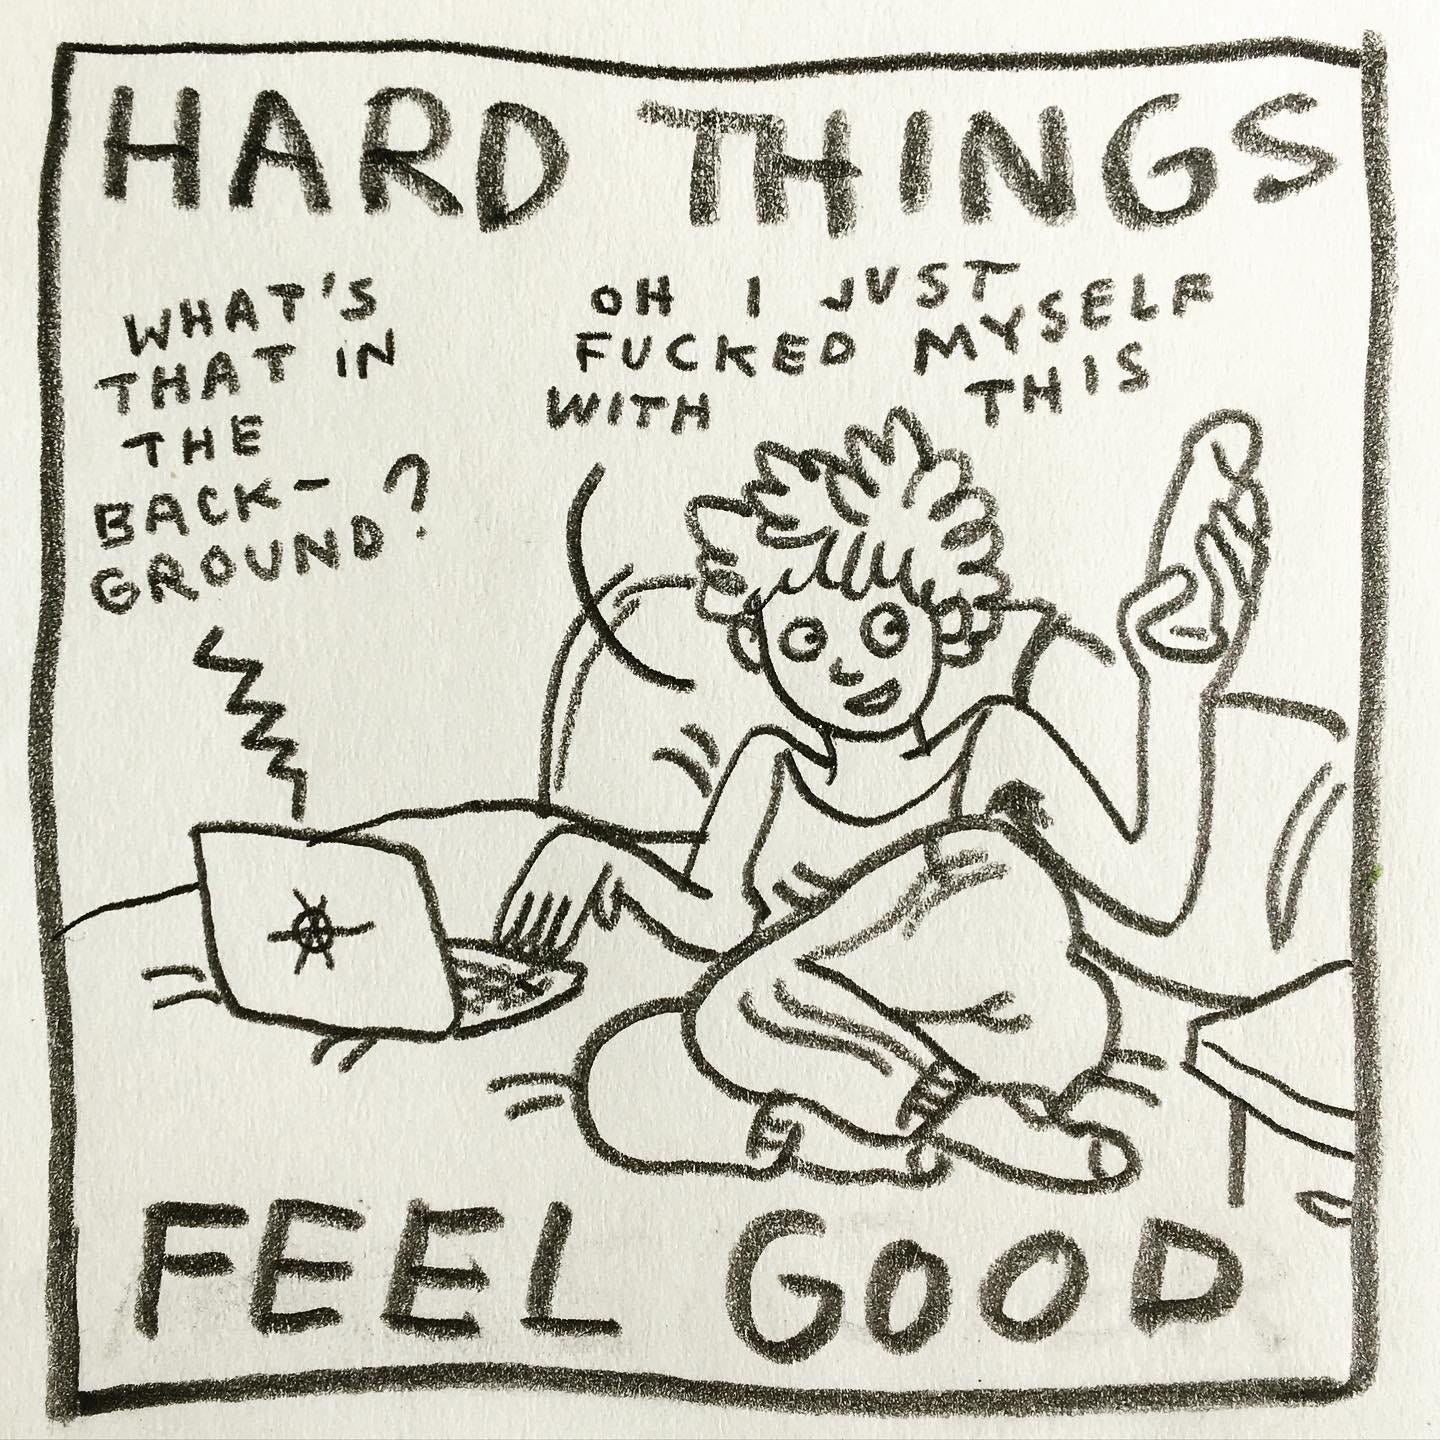 Panel 3: hard things feel good Image: Lark is curled on top of the bed touching their open laptop and looking at a dildo in their other hand. Someone on the laptop asks, "what's that in the background?" Lark replies, ”oh I just fucked myself with this"